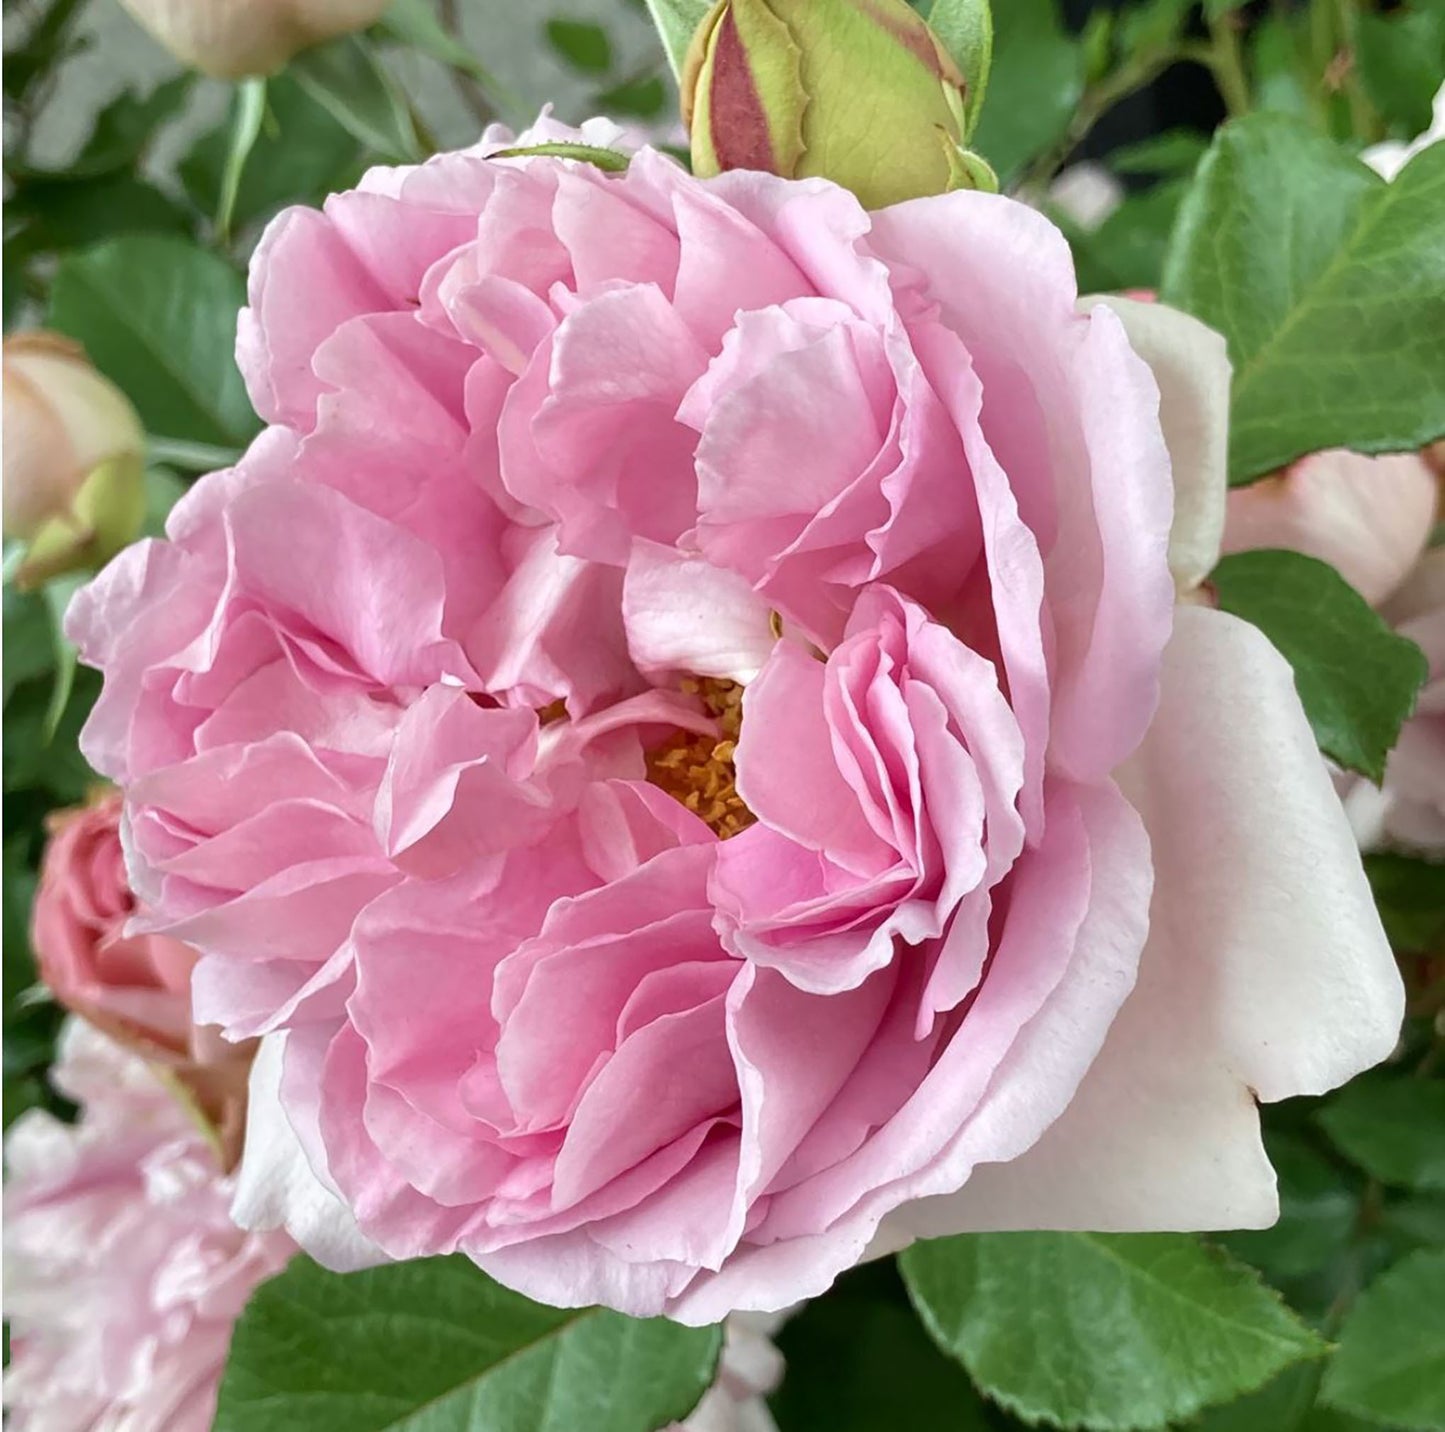 Rose Antoinette 绝代艳后, Shrub Rose, Strong fragrance. Large. Heat Resistant.2 Years Old 1 Gal, Non-Grafted/Own Root.